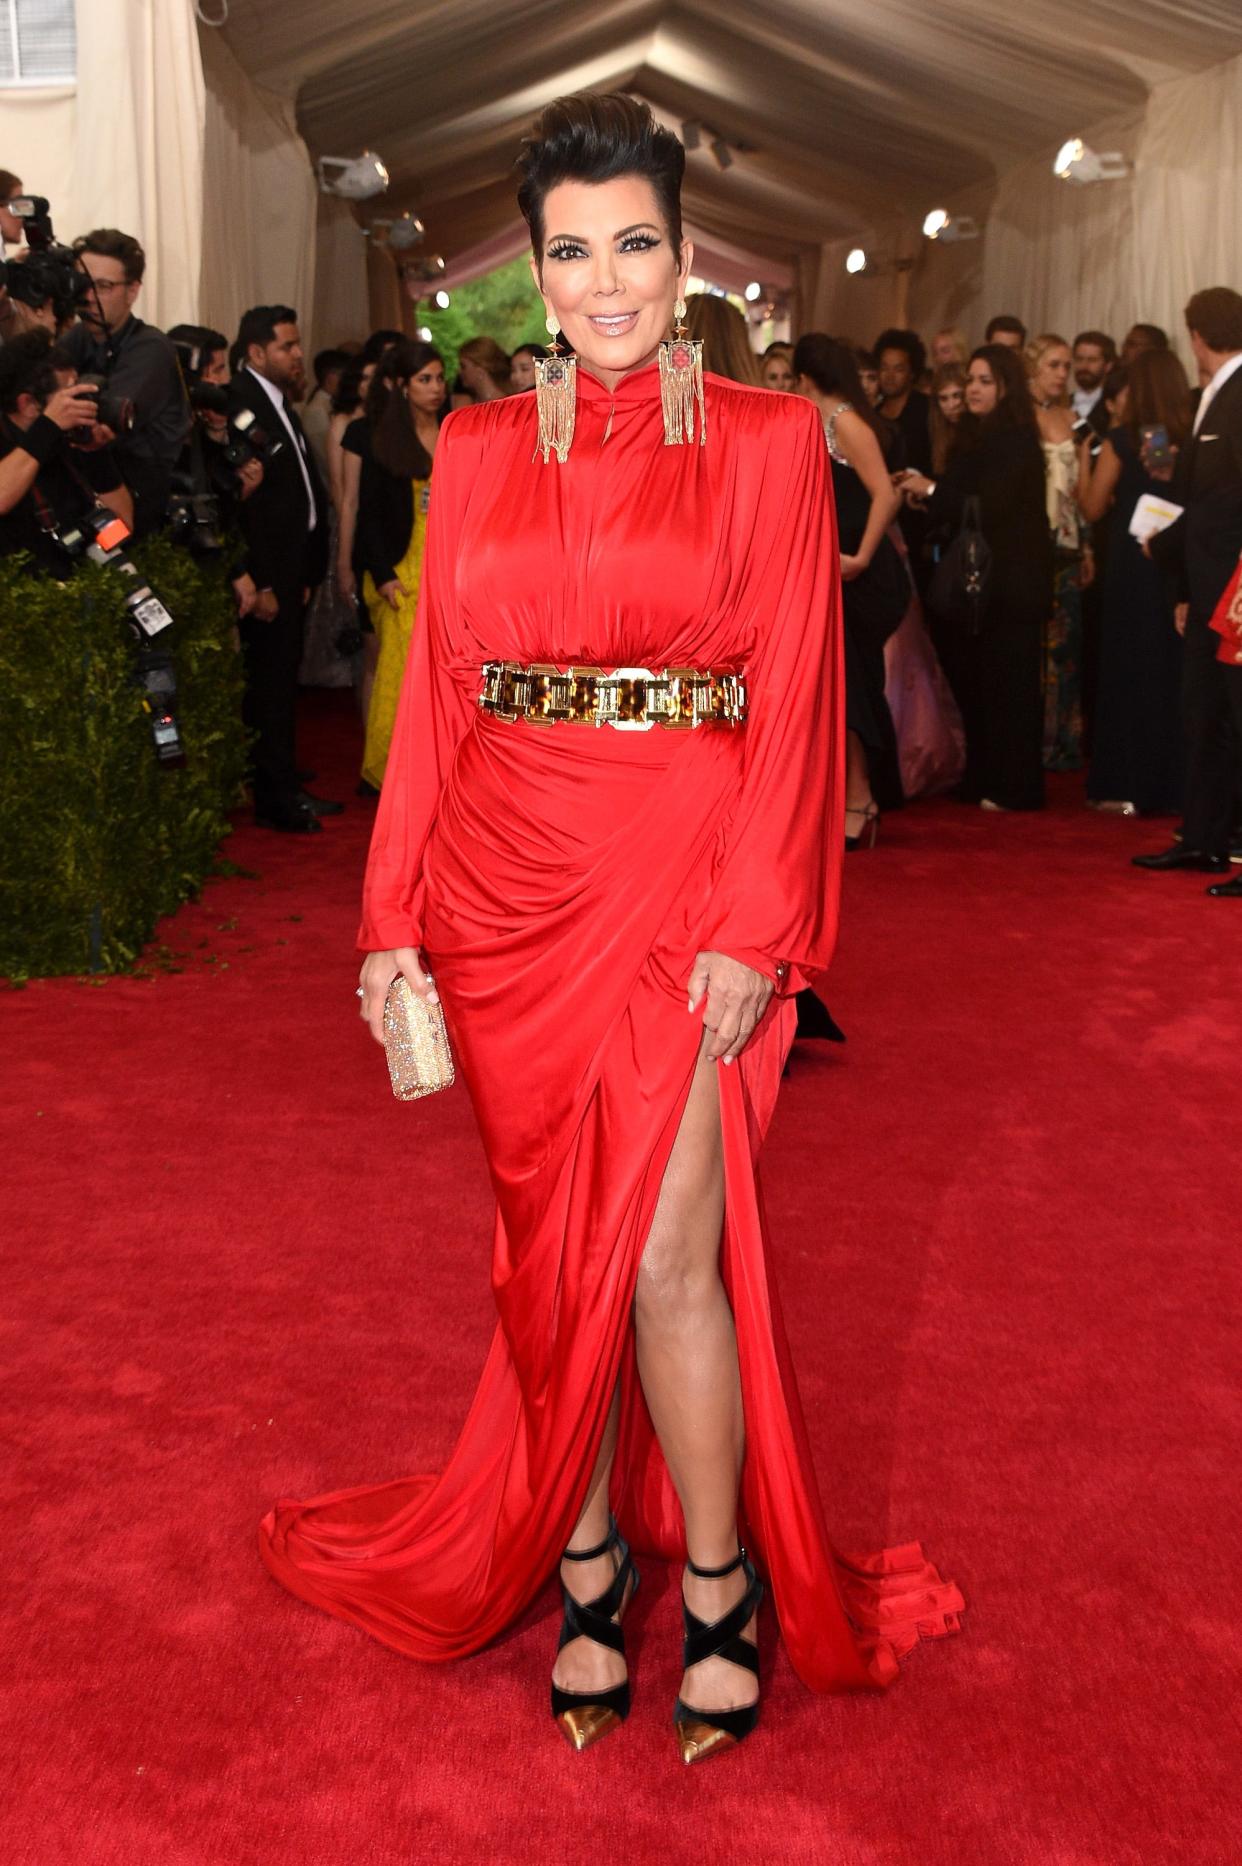 Kris Jenner attends the 2015 Met Gala in a red gown with a thigh-high slit that she accessorized with a gold belt, dangling gold earrings, and black strappy heels with gold pointed toes.